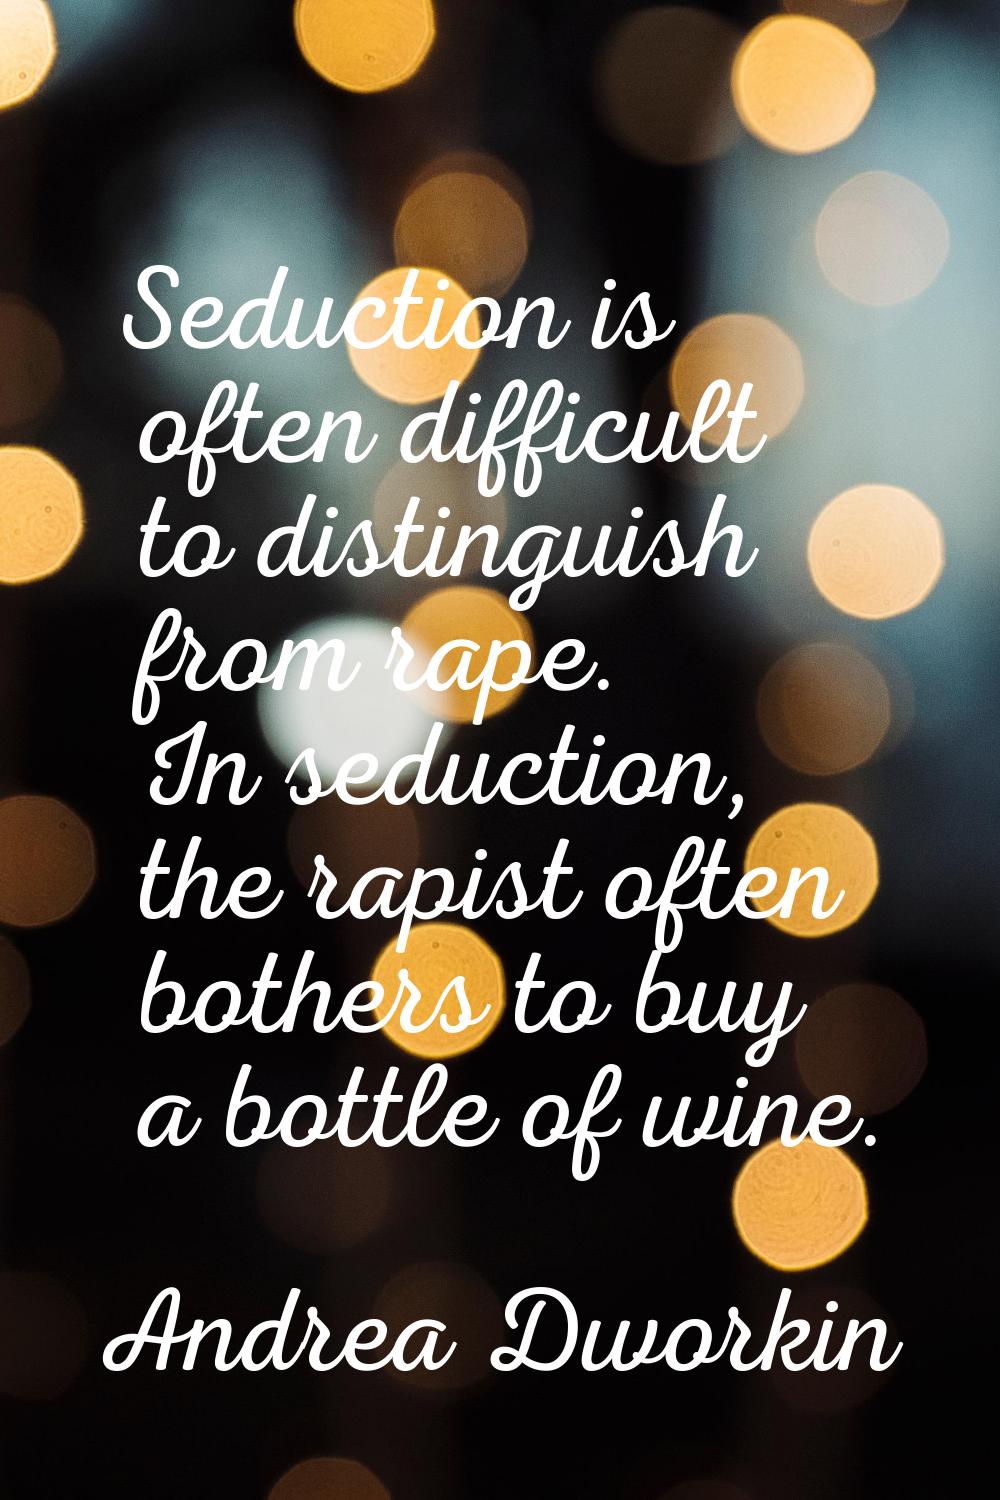 Seduction is often difficult to distinguish from rape. In seduction, the rapist often bothers to bu